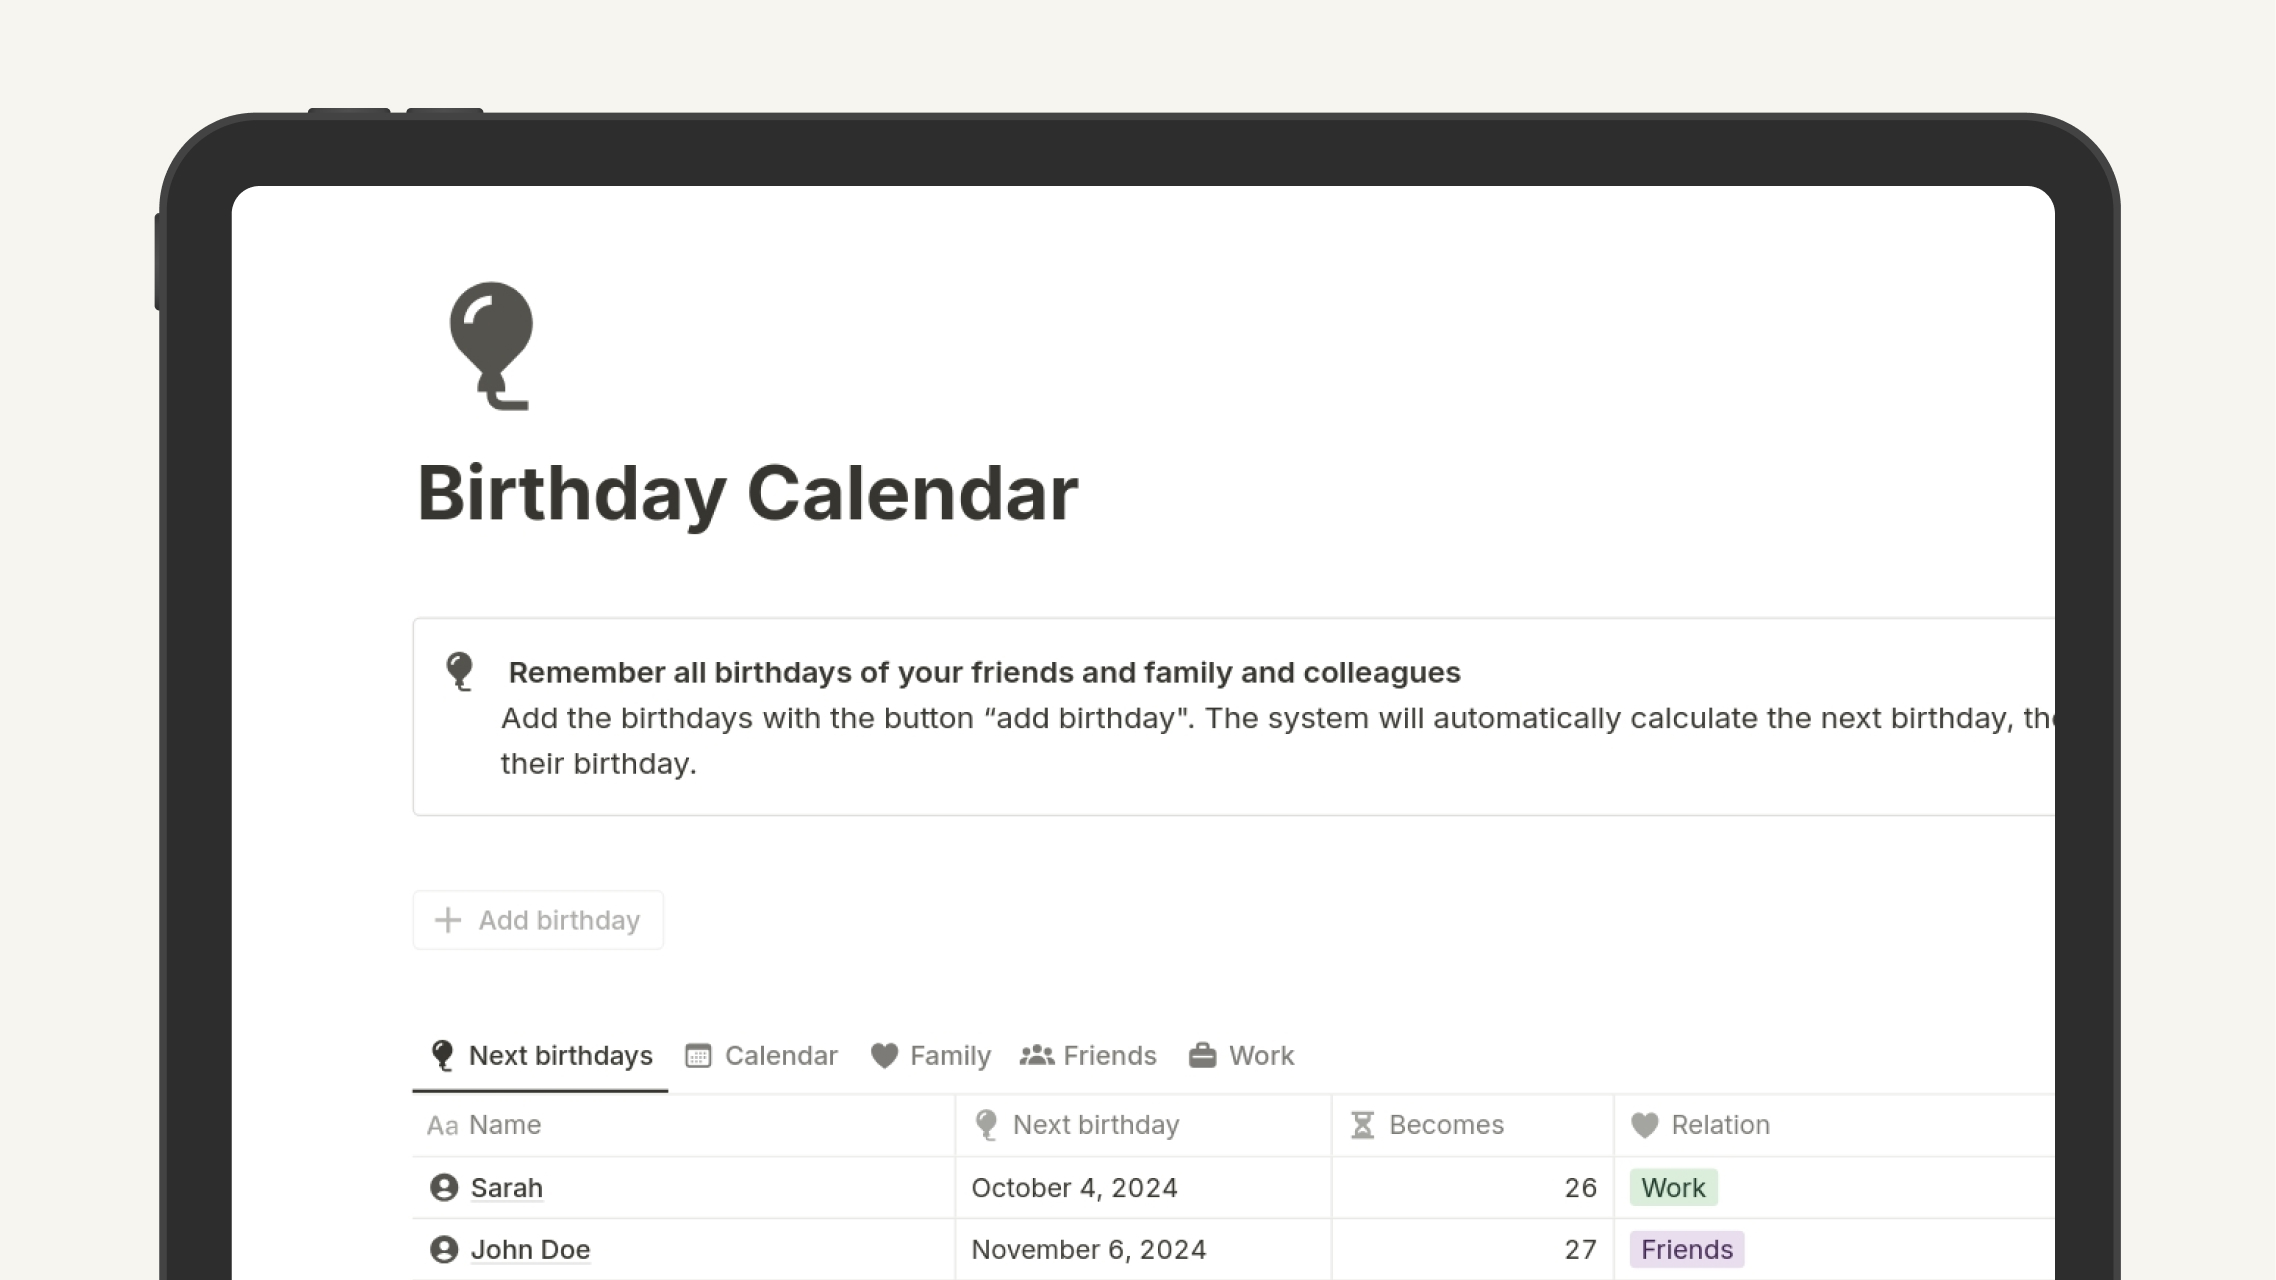 Remember all birthdays of your friends and family and colleagues. Add the birthdays with the button “add birthday". The system will automatically calculate the next birthday, the age of the person, and how many days are left until their birthday. 